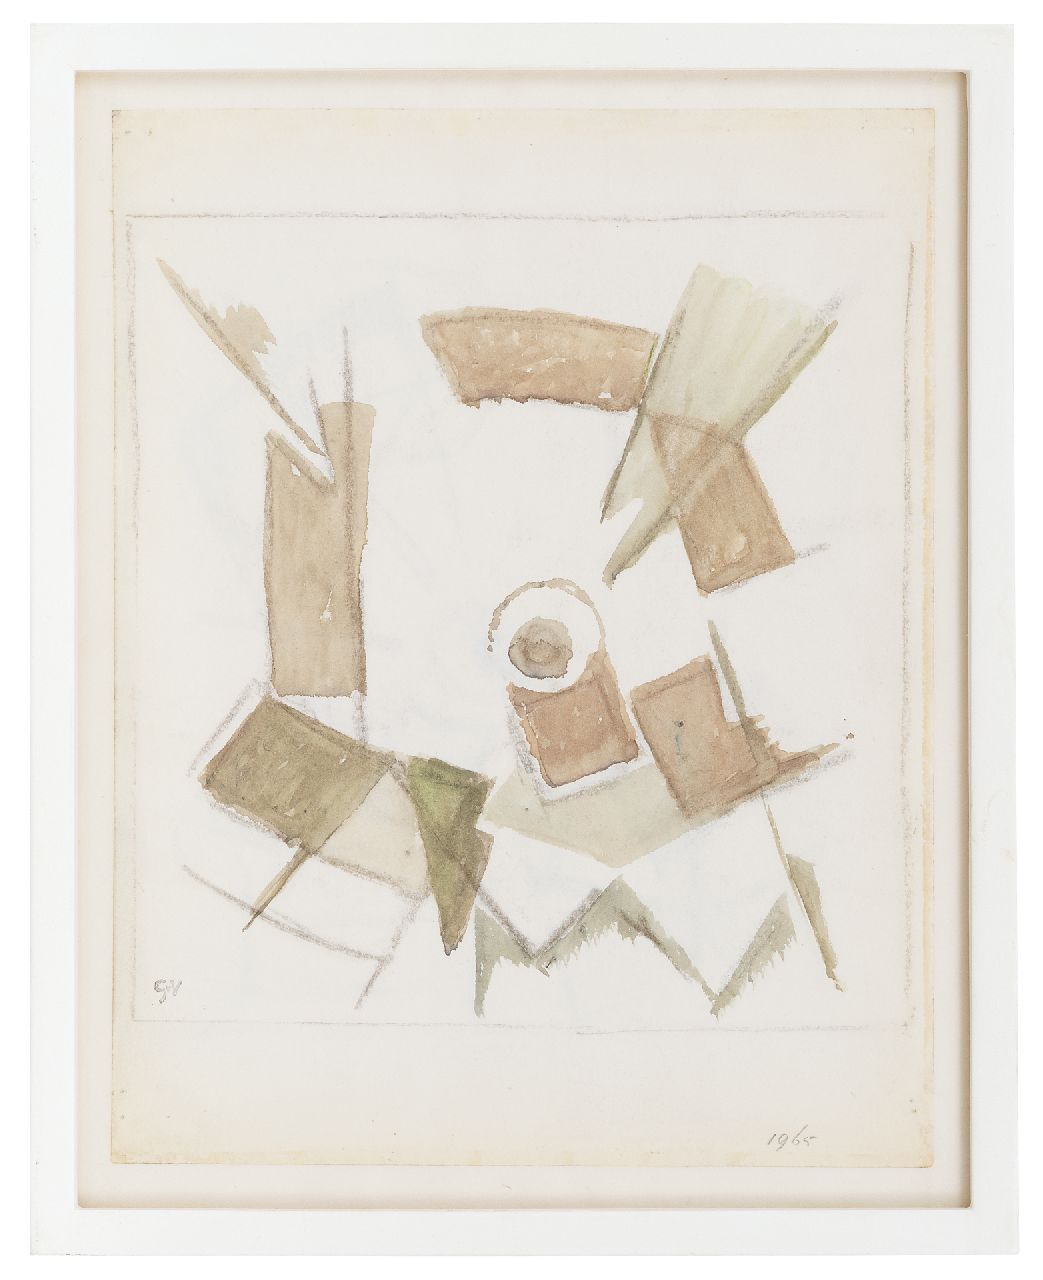 Velde G. van | Gerardus 'Geer' van Velde | Watercolours and drawings offered for sale | Untitled, chalk and watercolour on vellum paper 21.0 x 20.0 cm, signed l.l. with the artist's stamp and dated 1965